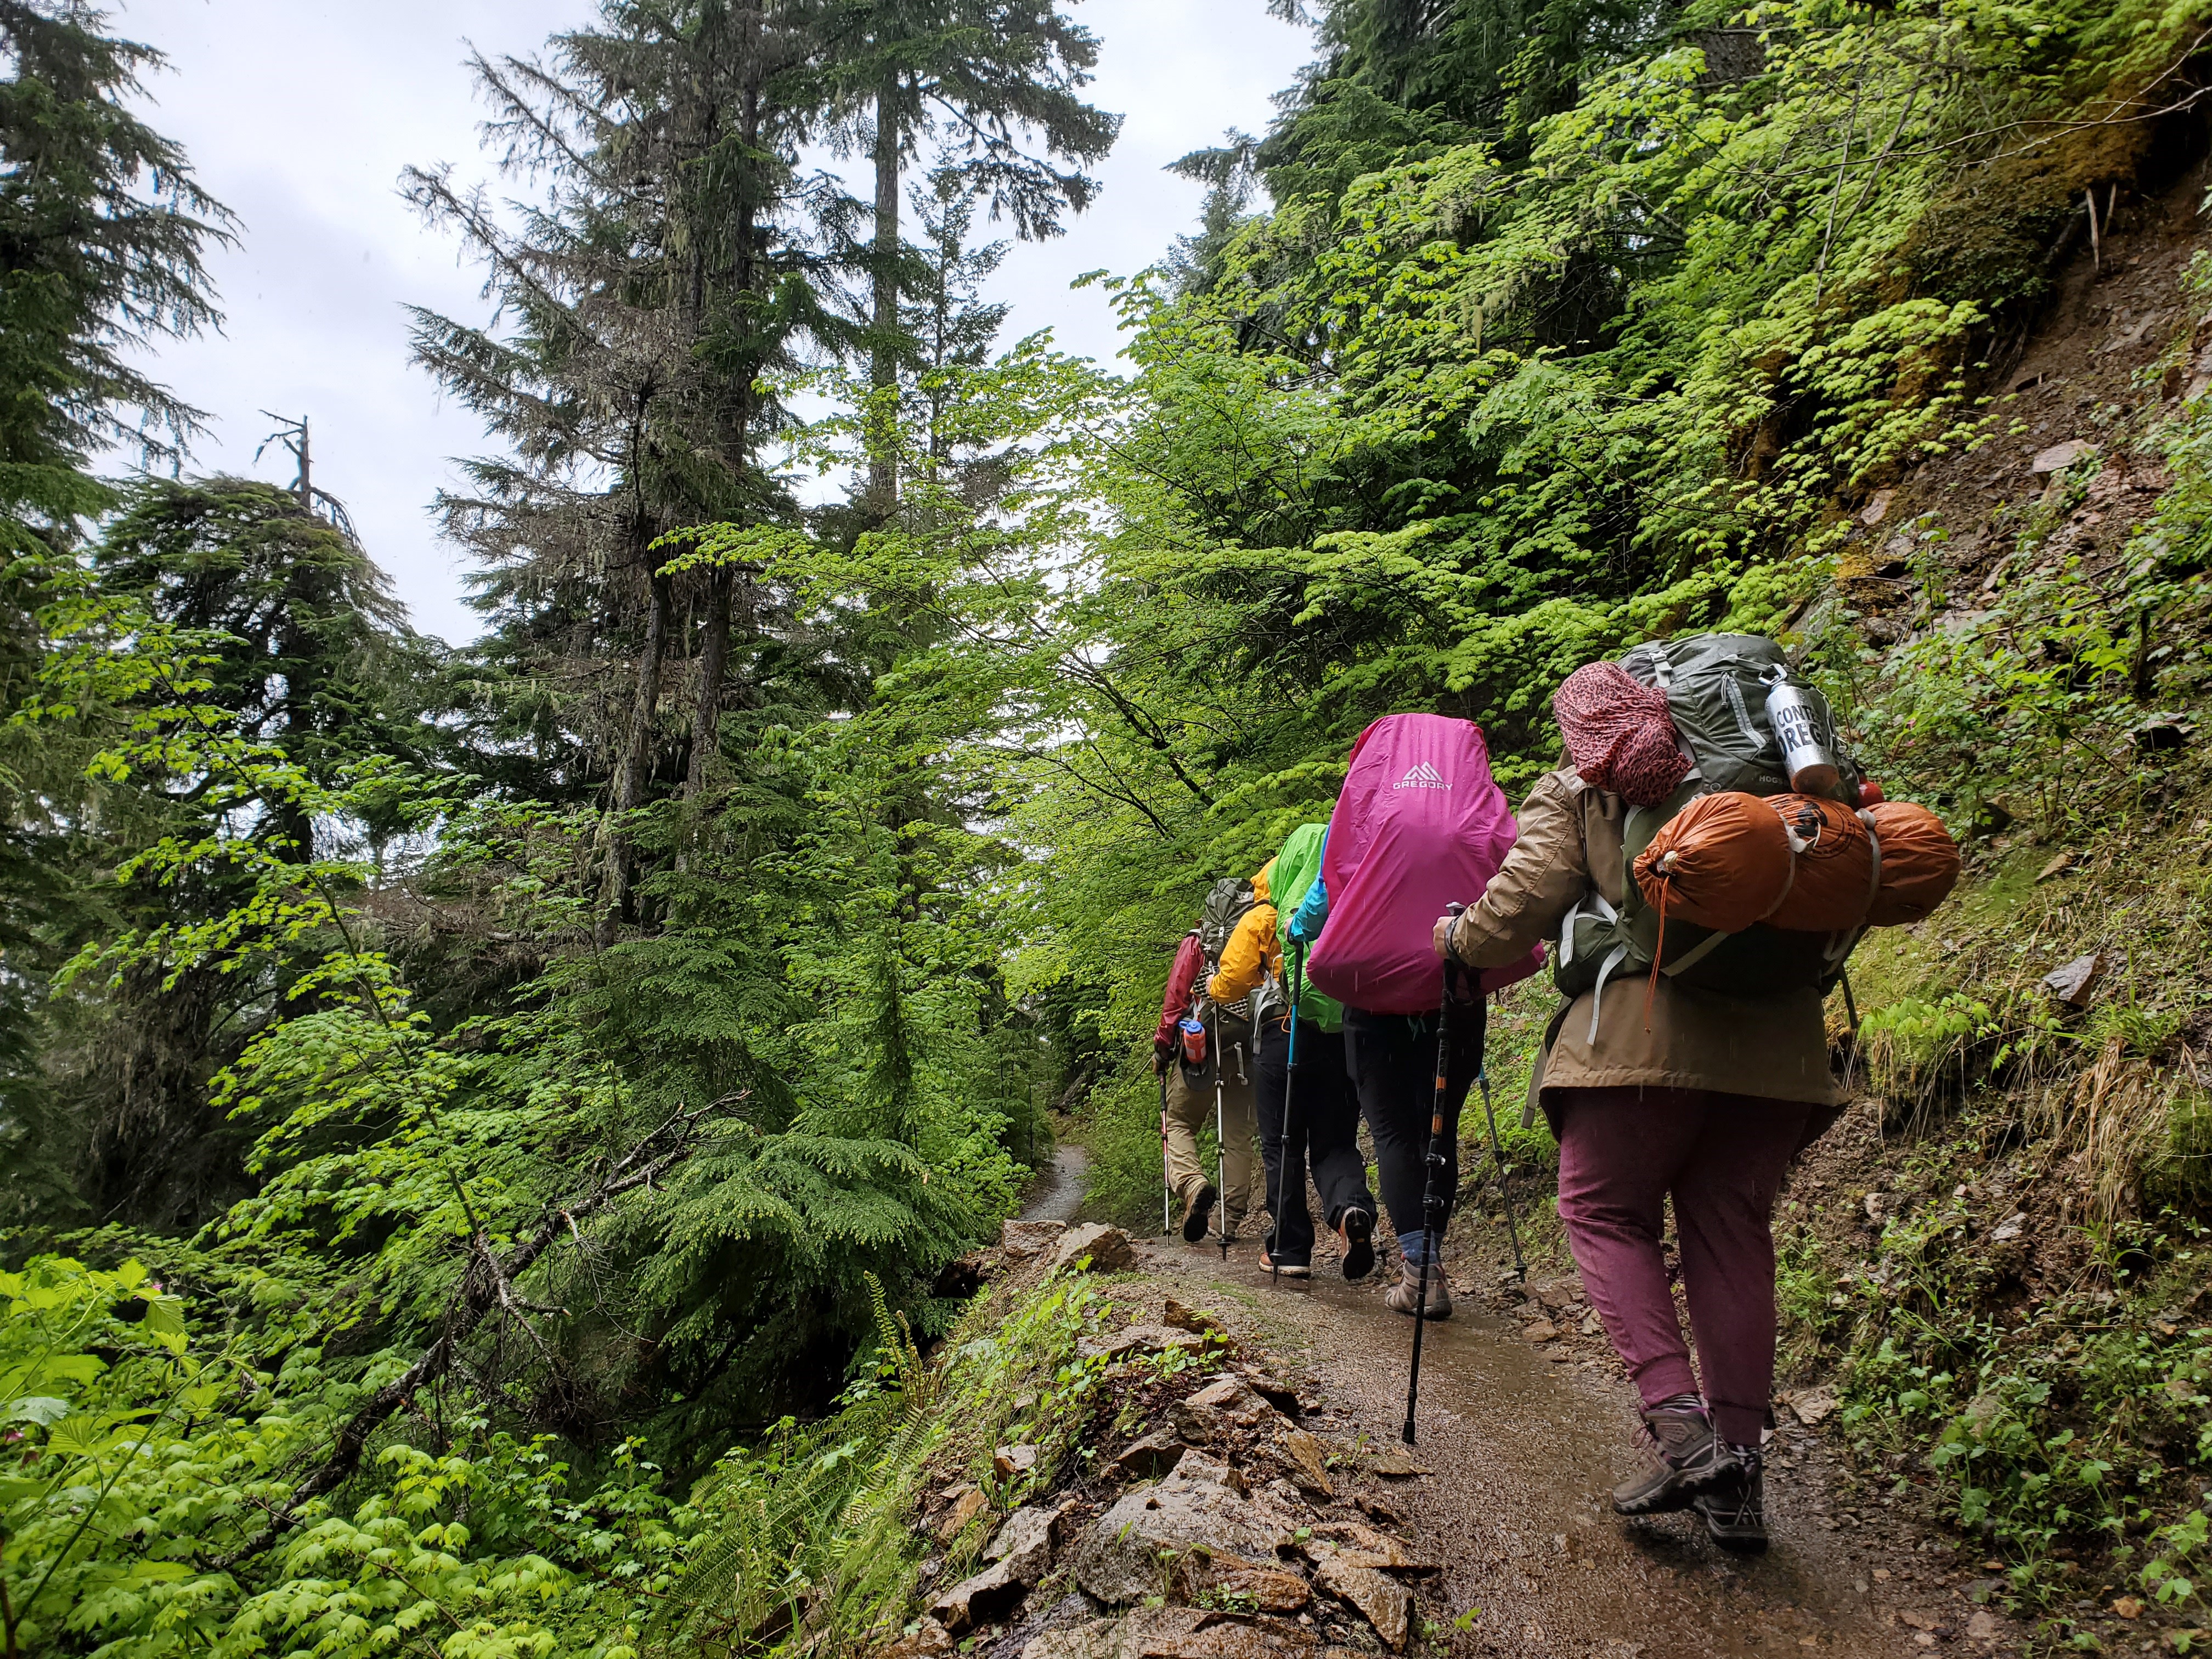 A line of hikers with backpacks walk away from the camera down a wooded trail.